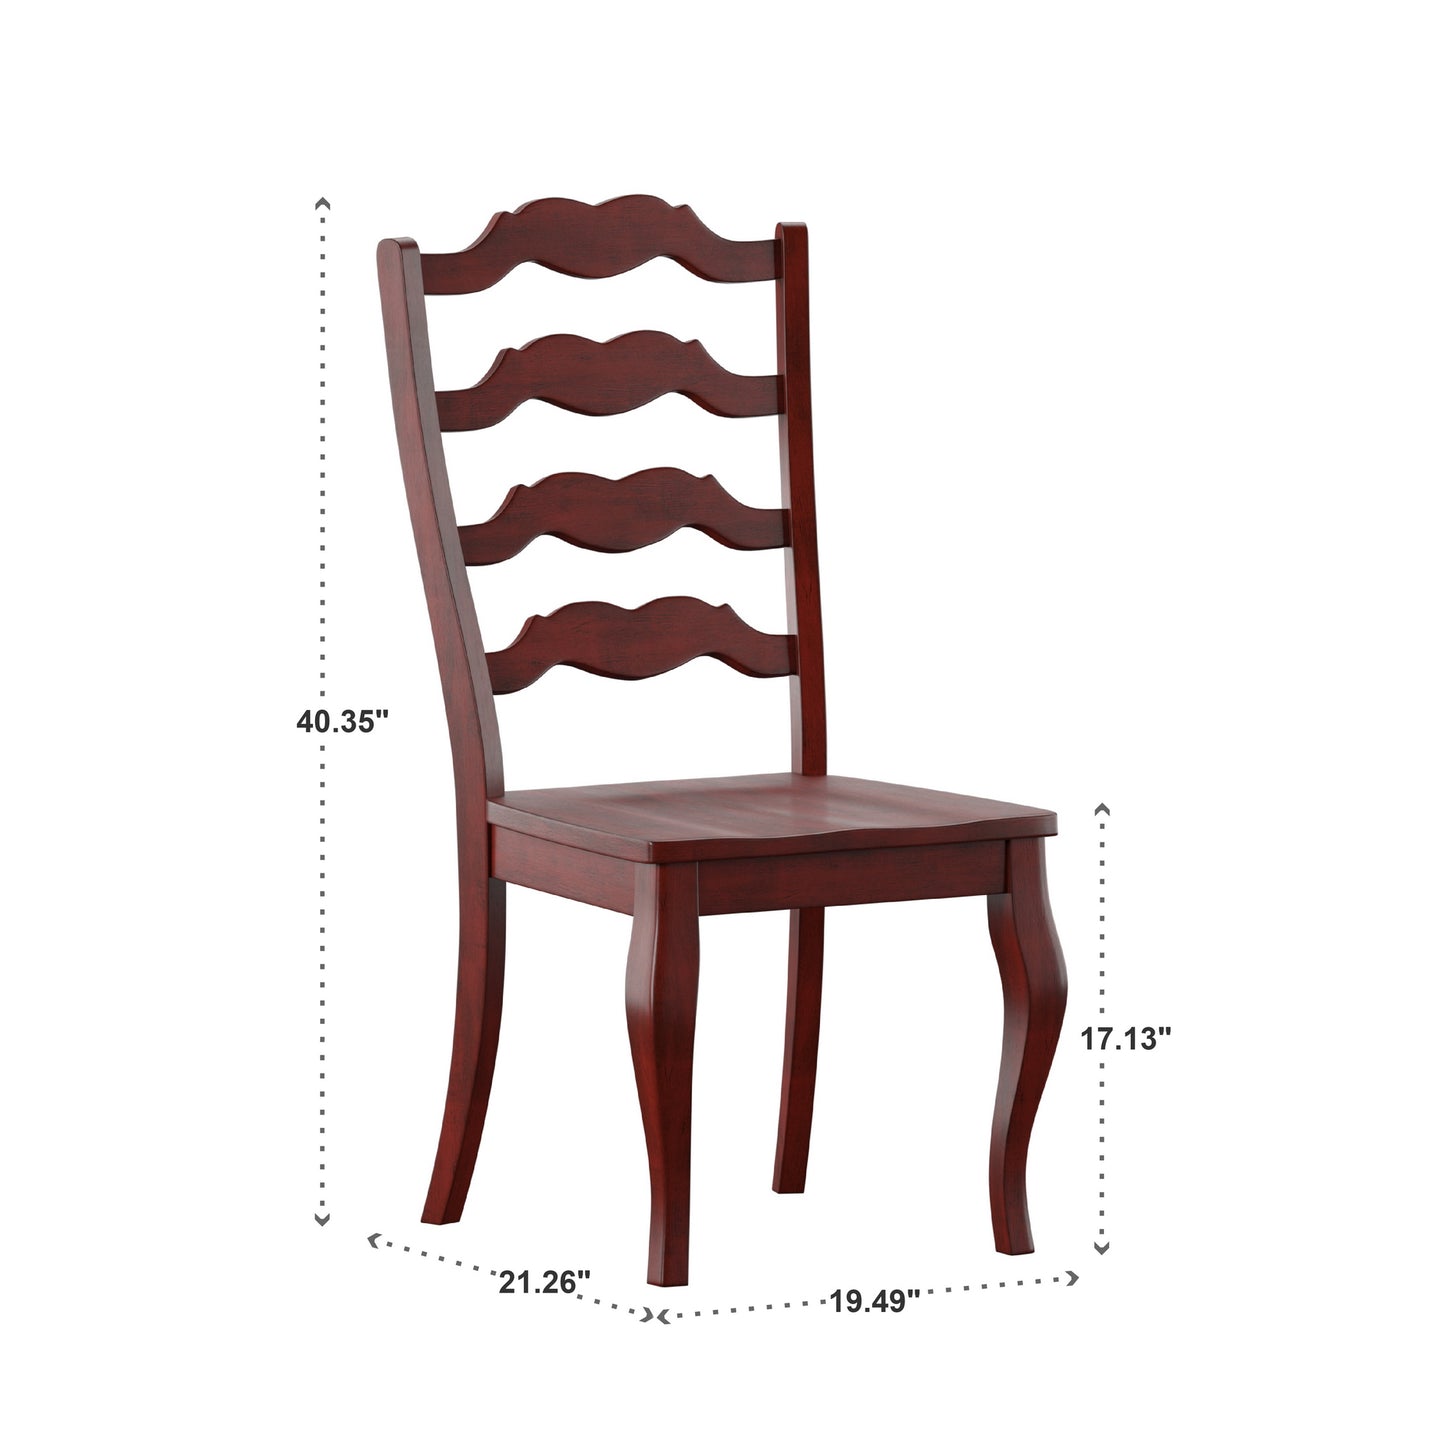 French Ladder Back Wood Dining Chairs (Set of 2) - Antique Berry Red